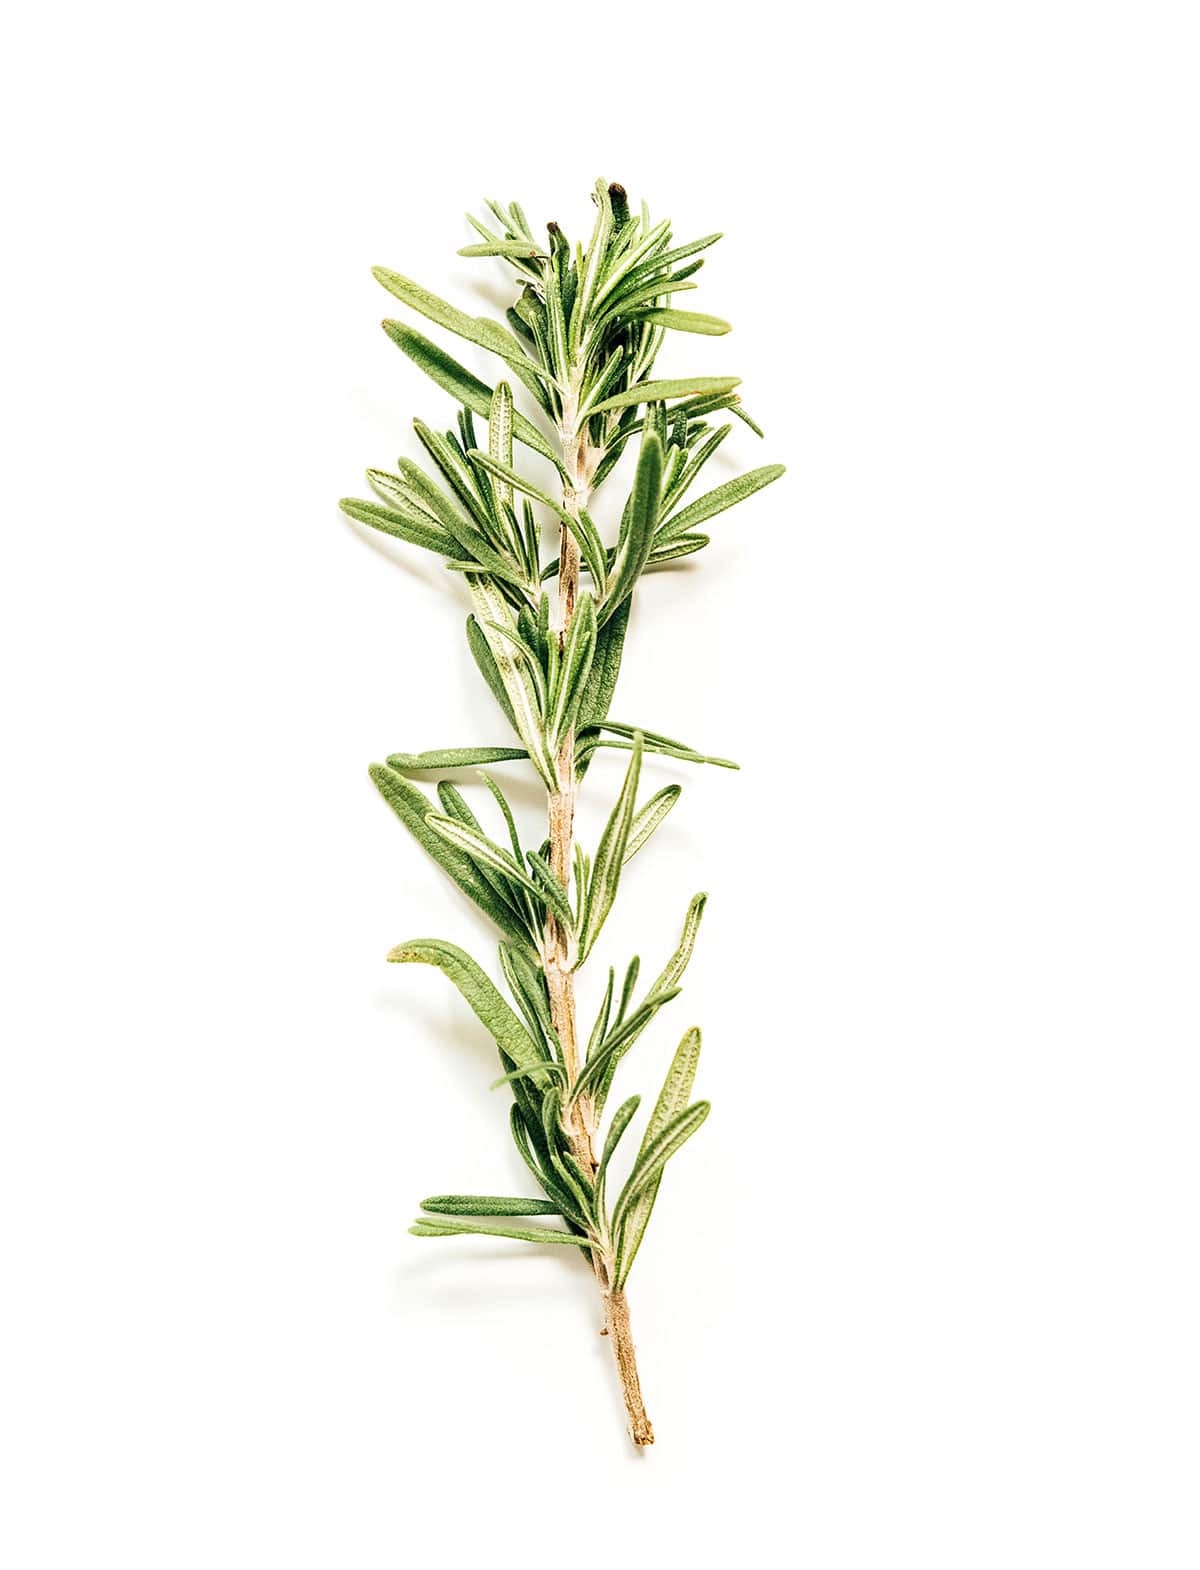 Rosemary sprig on a white background.